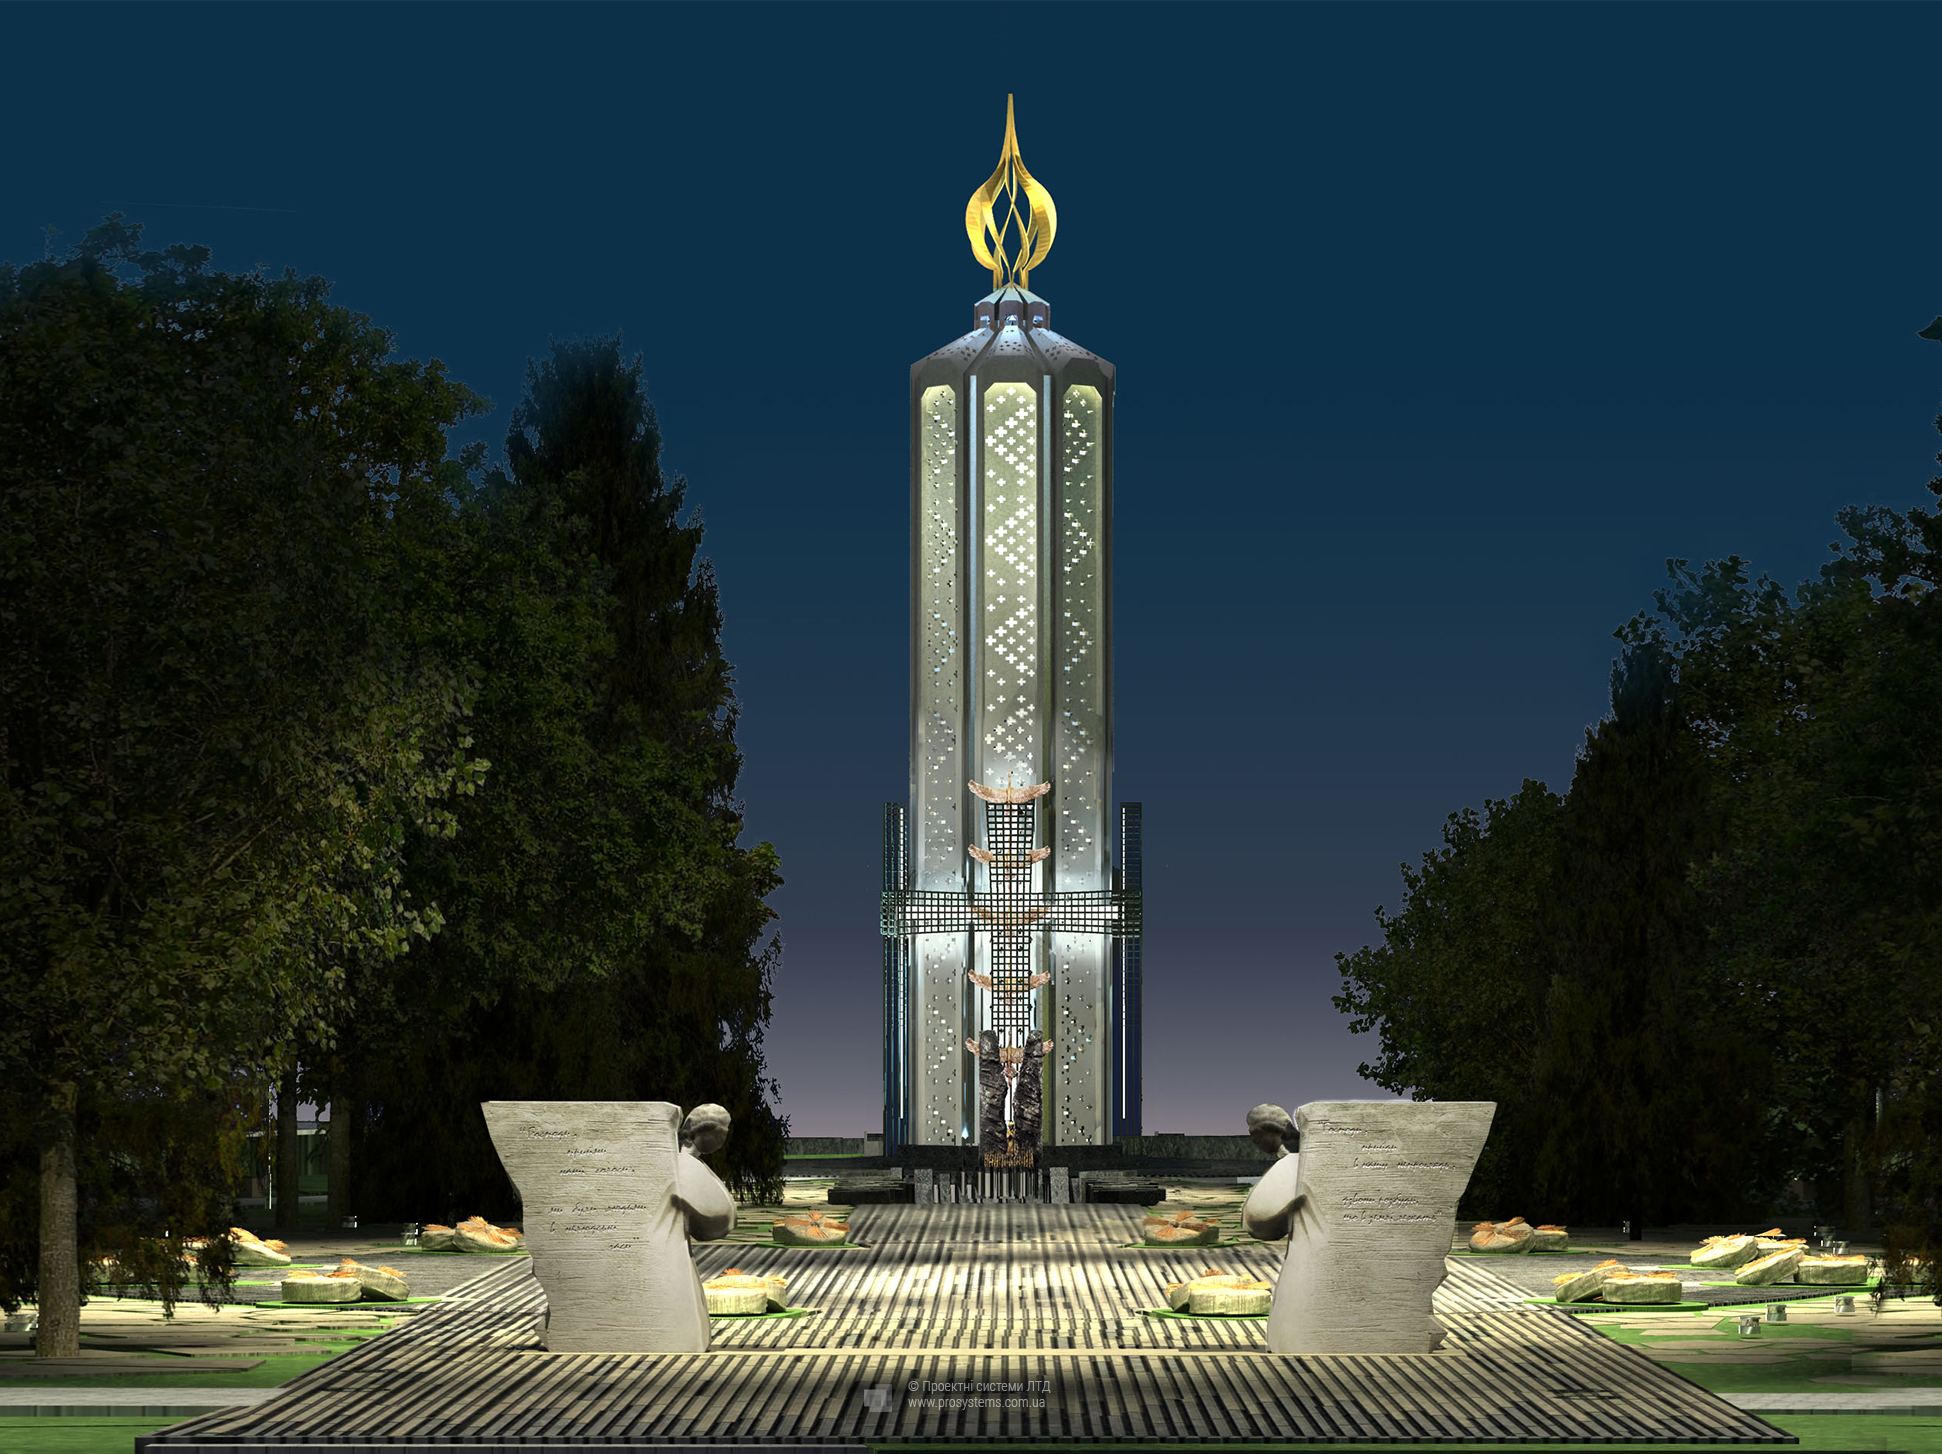 Victims of Holodomor Memorial (First Quarter)